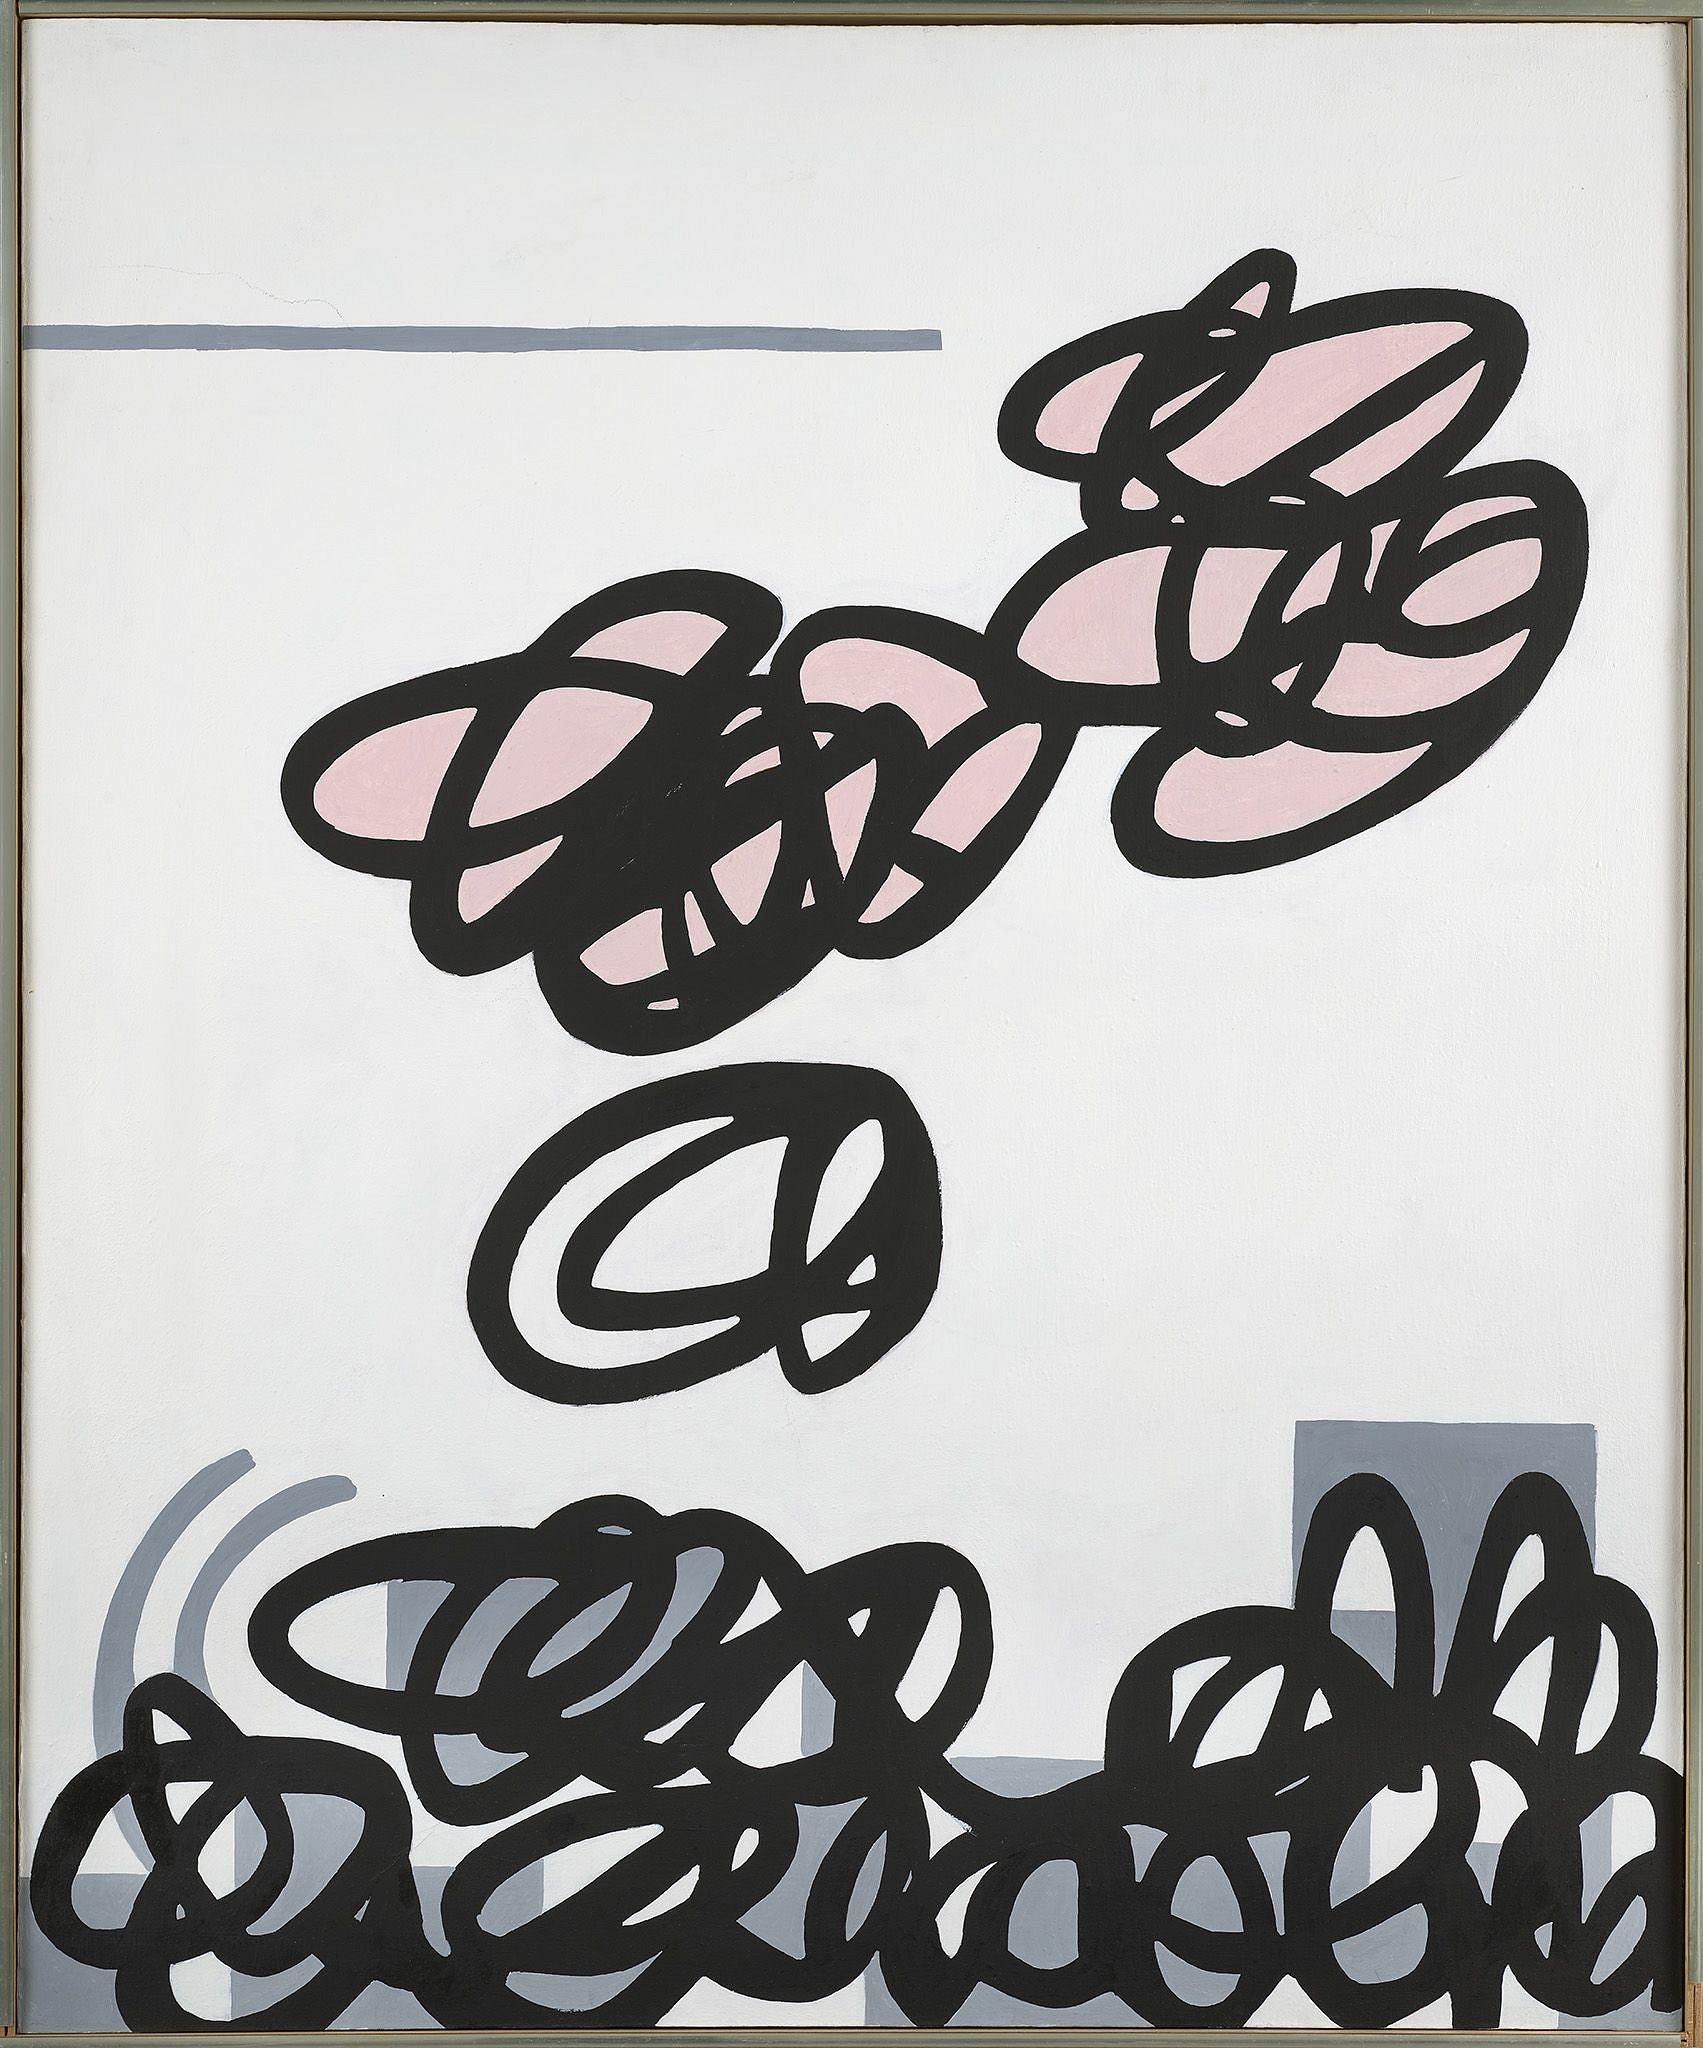 PRESS RELEASE: Raymond Hendler | Paintings from the 1970s, Mar 17 - Apr 16, 2016